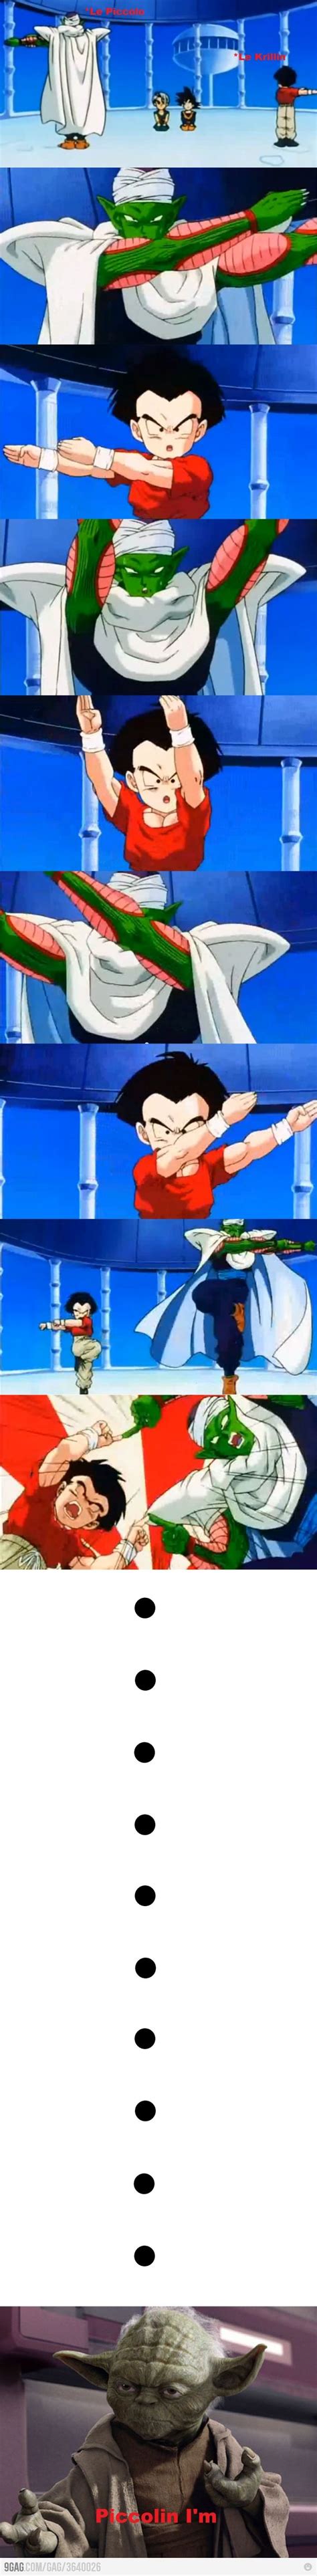 One such relationship involves the curious dynamic between piccolo and goku's son, gohan. Piccolo & Krillin fusion | Anime funny, Dragon ball z ...